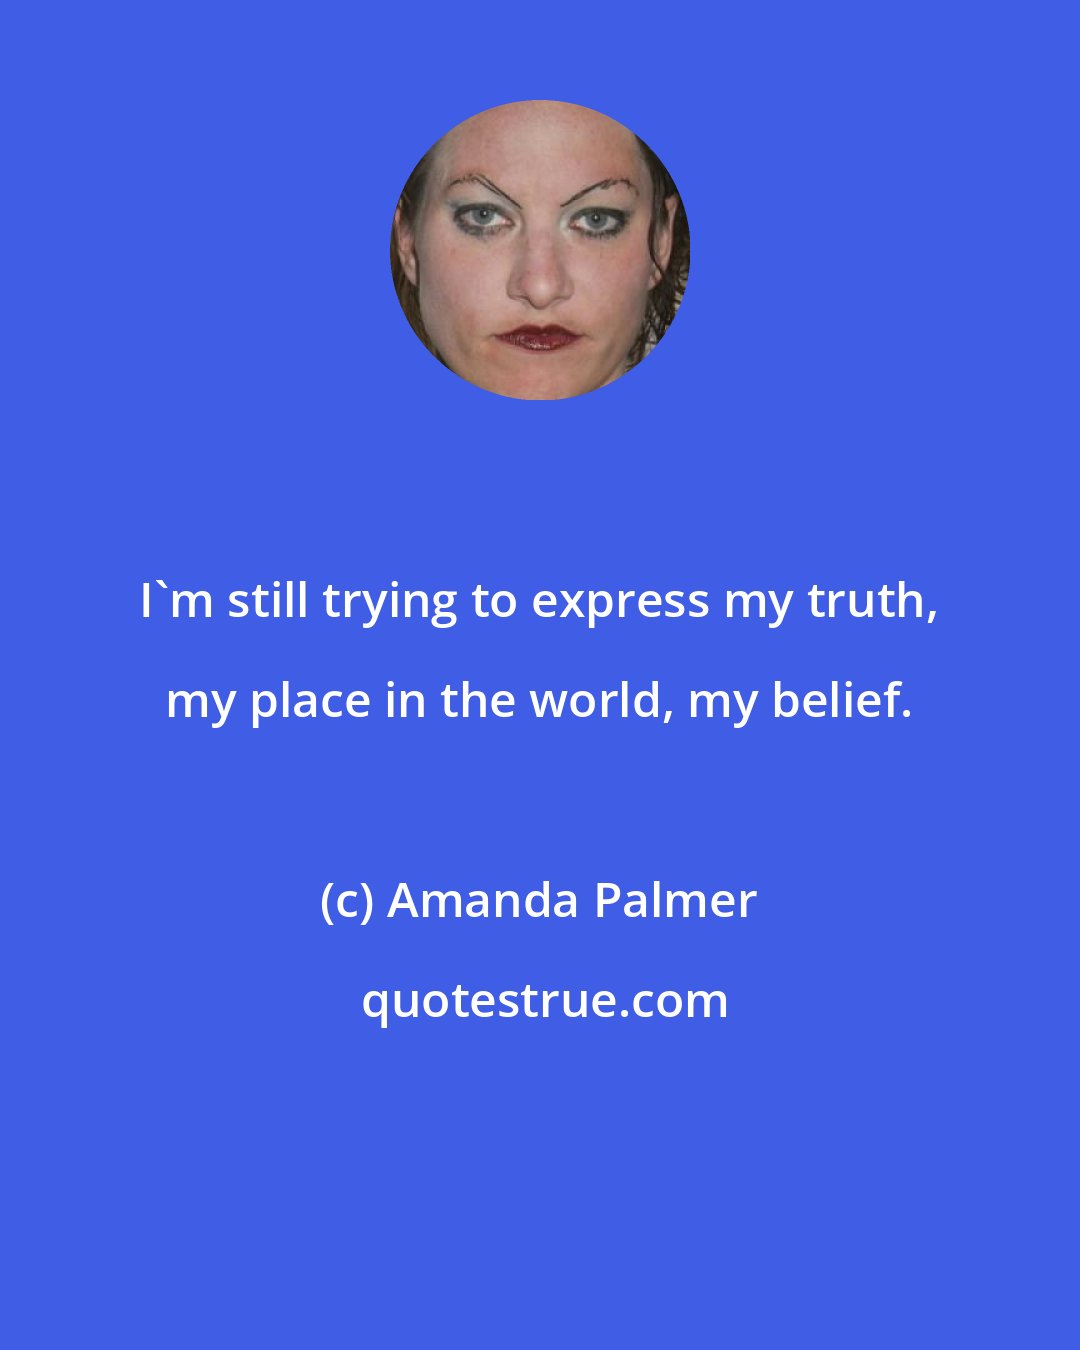 Amanda Palmer: I'm still trying to express my truth, my place in the world, my belief.